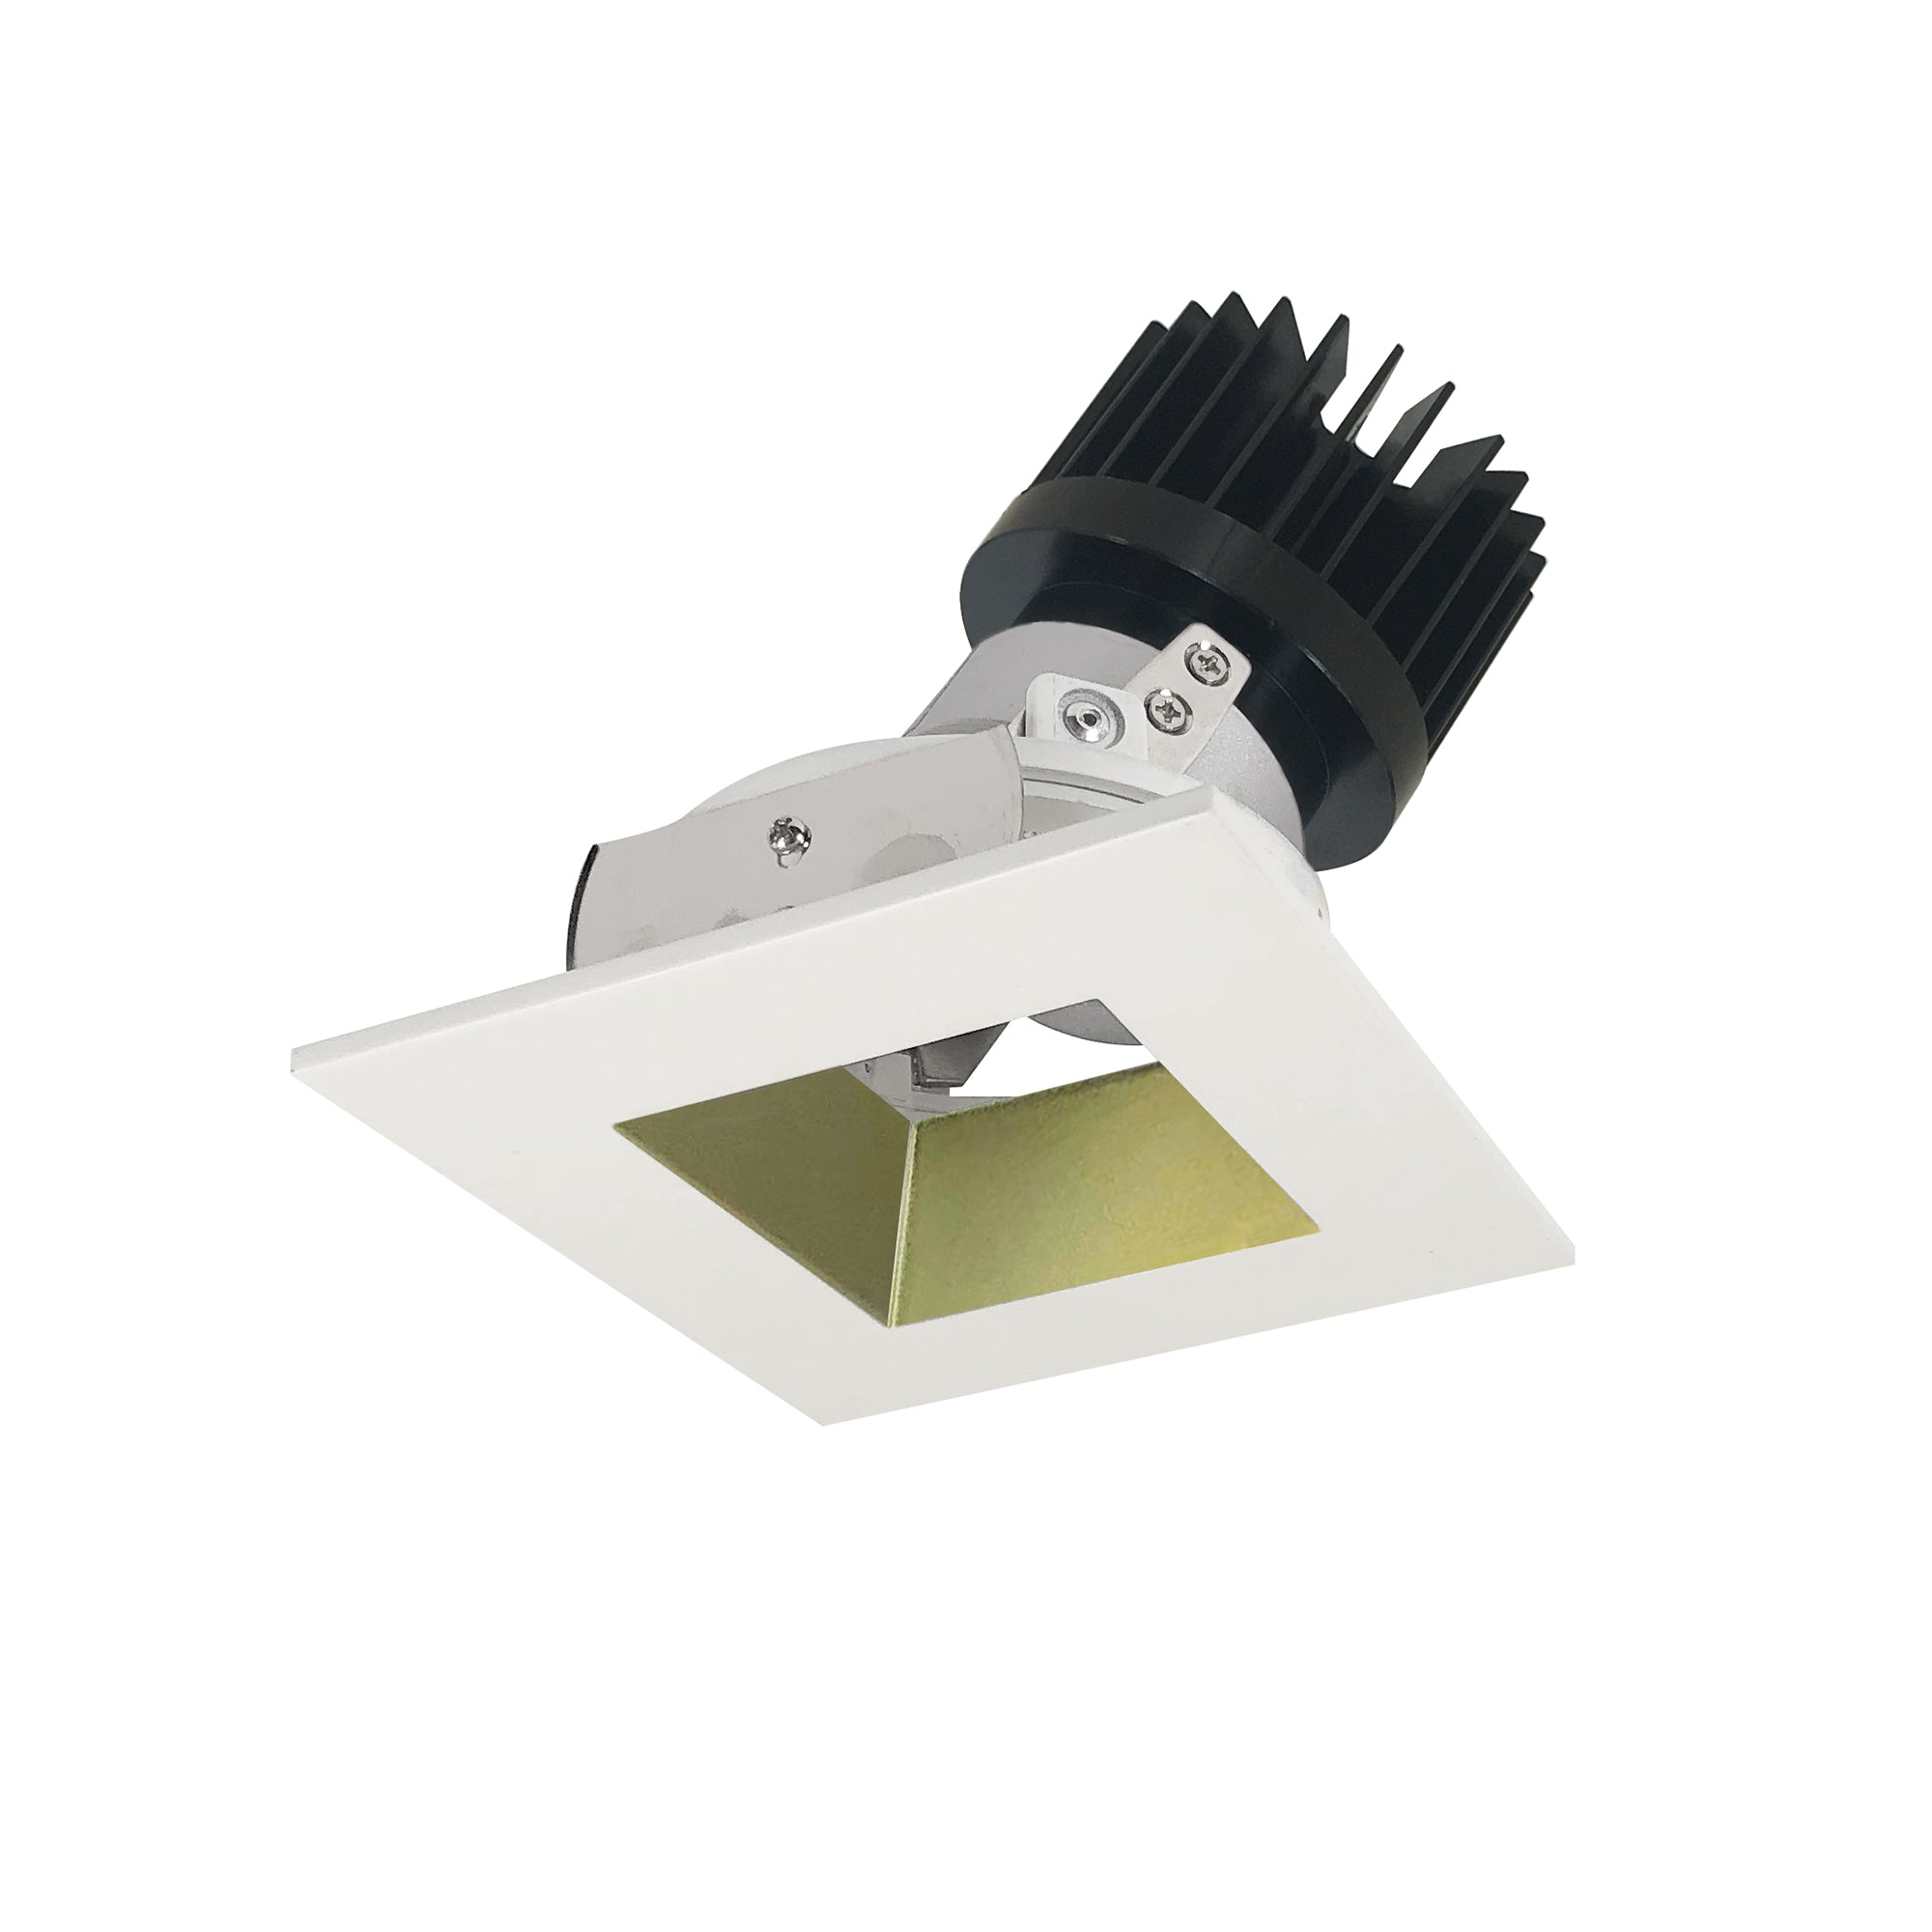 Nora Lighting NIO-4SDSQ30XCHMPW/HL 4" Iolite LED Square Adjustable Reflector With Square Aperture, 1500lm/2000lm (varies by housing), 3000K - Champagne Haze Reflector / Matte Powder White Flange